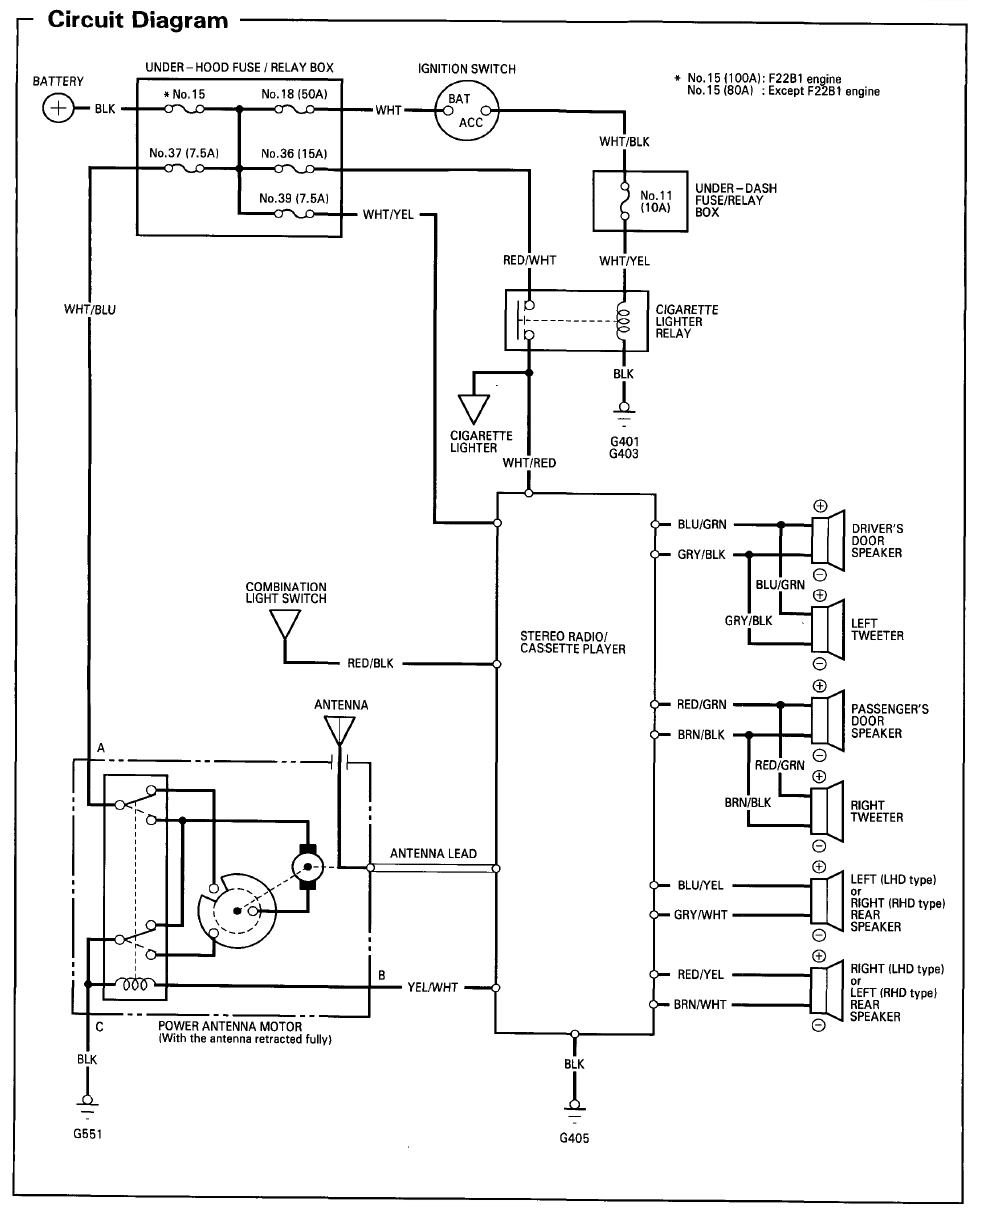 94 Accord Radio Wiring Diagram Cant Find The Right One Honda Tech